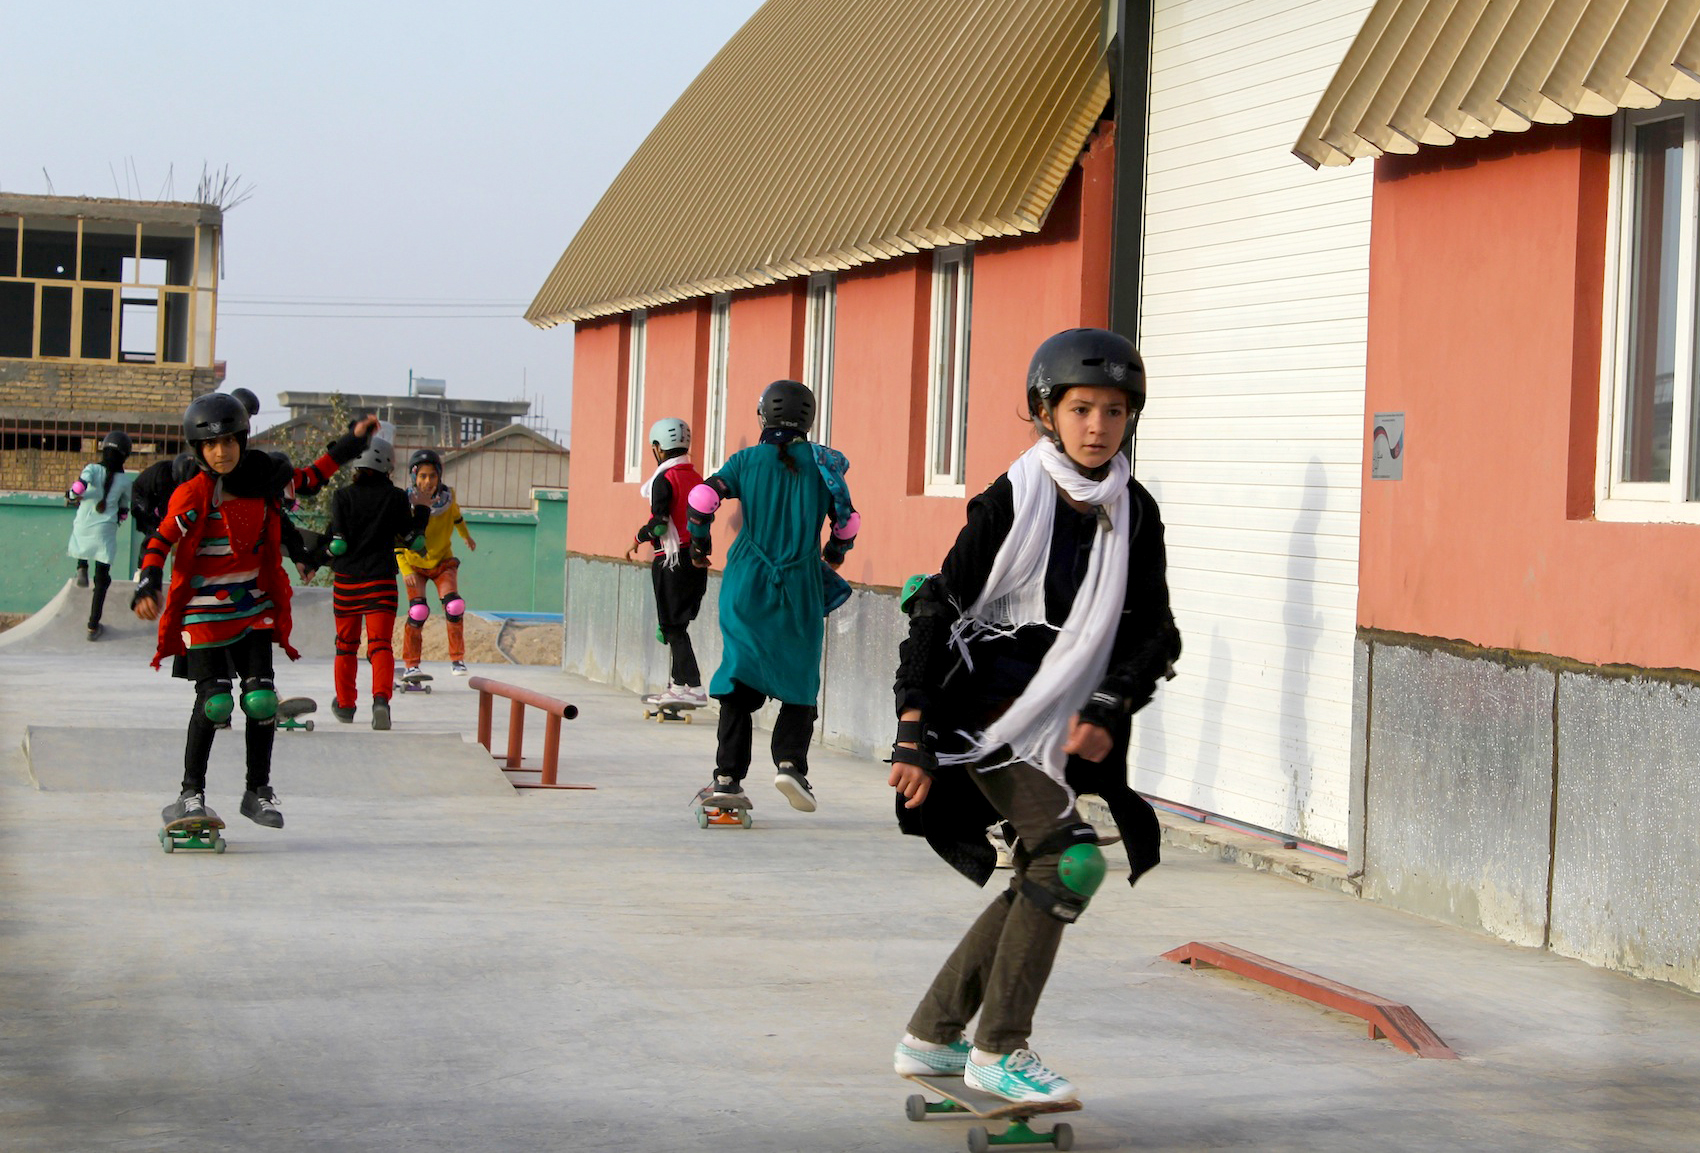 PHOTO: Skateistan is an organization that brings education to street youths through skateboarding in countries like Afghanistan and Cambodia.